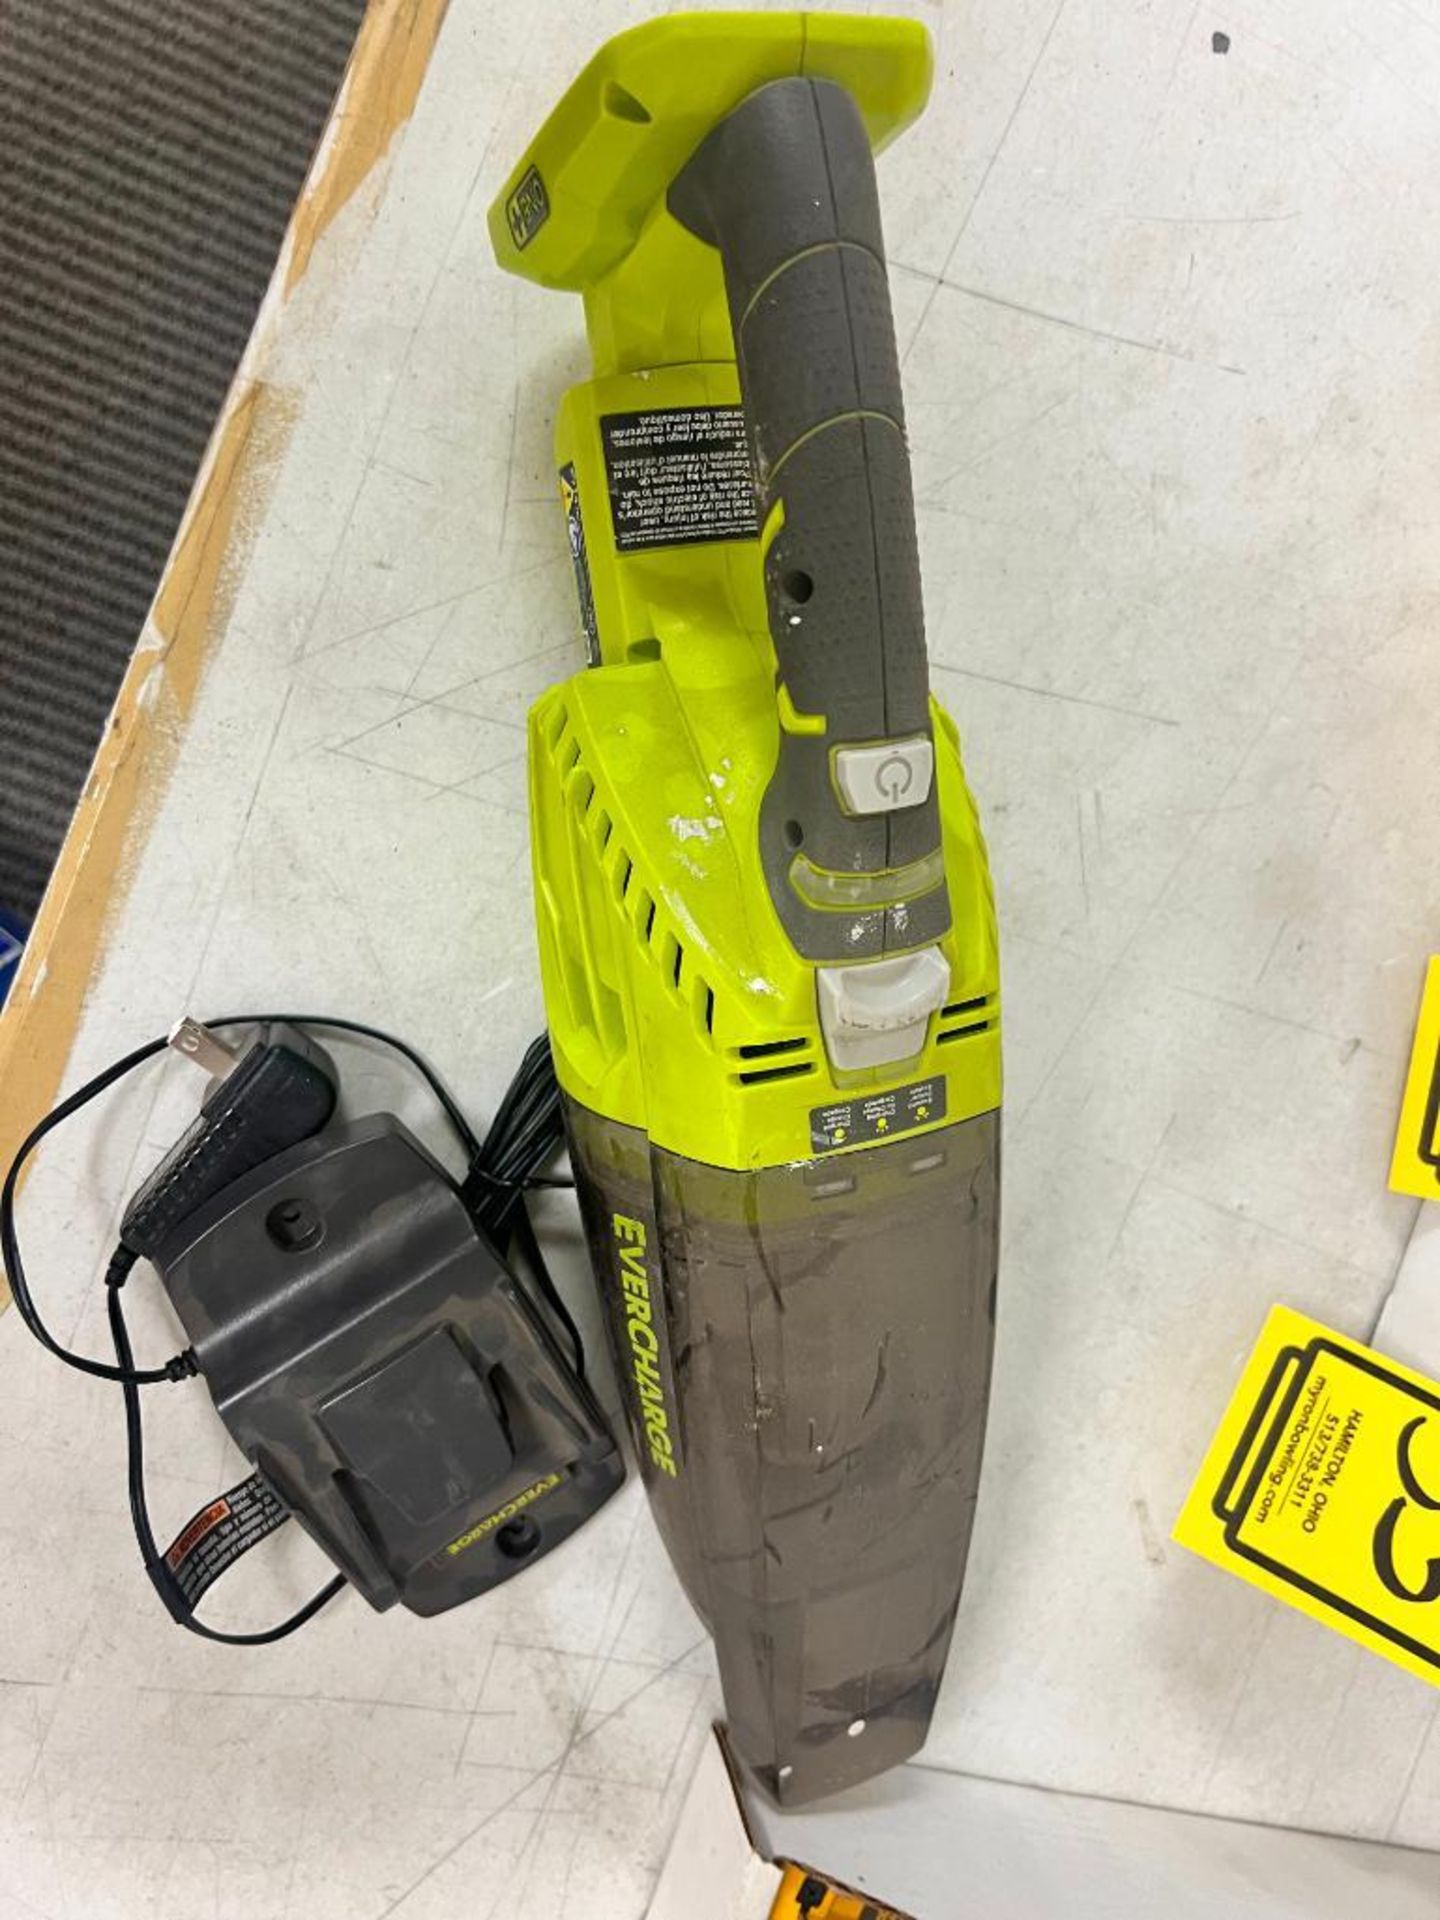 Ryobi Evercharge Cordless Vacuum, Model P714, w/ Charger (No Battery) - Image 2 of 3